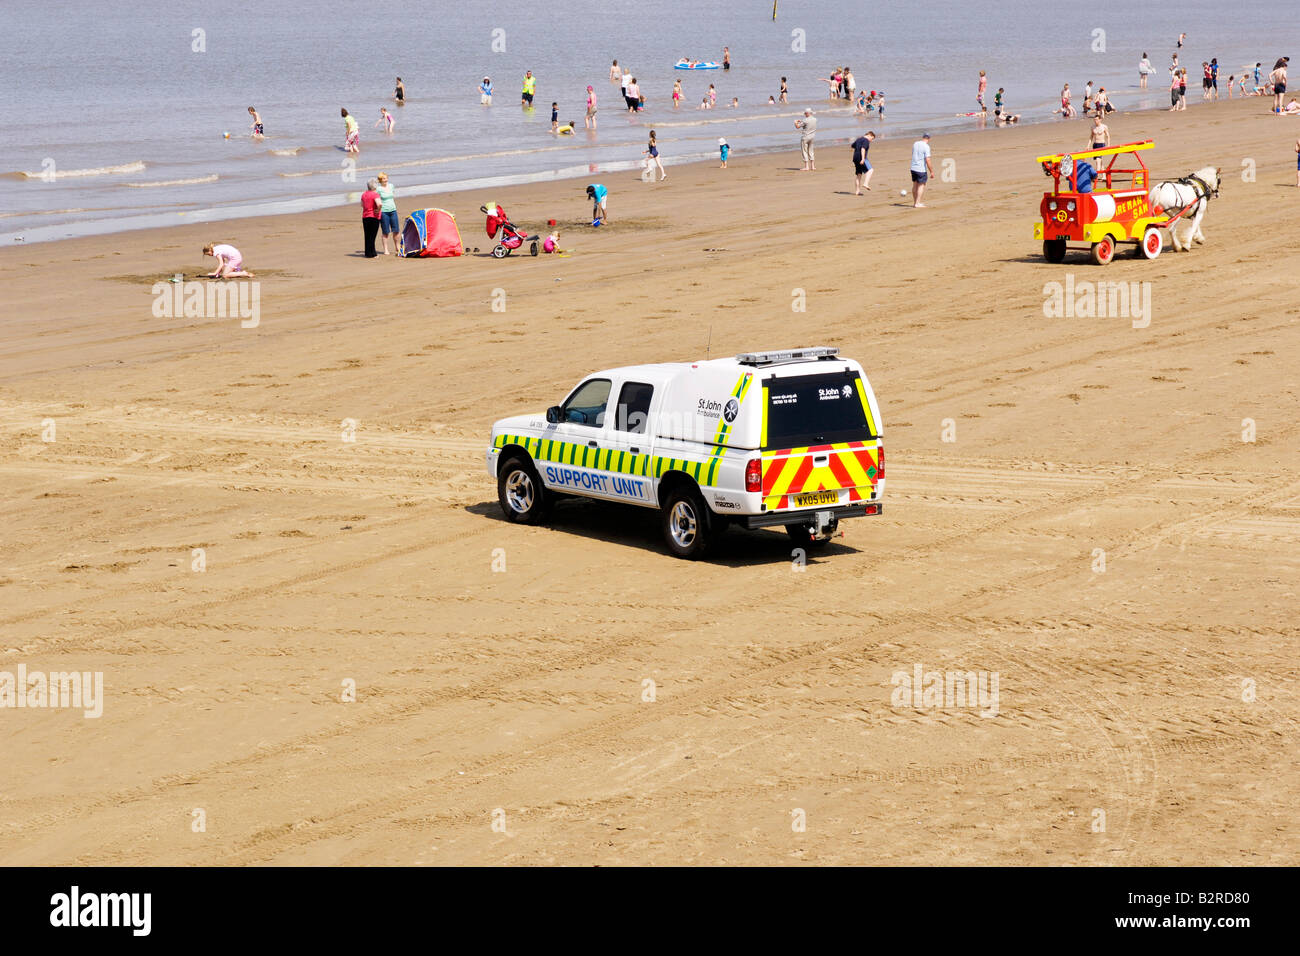 St Johns Ambulance Support vehicle on beach patrol in Weston Super Mare Stock Photo